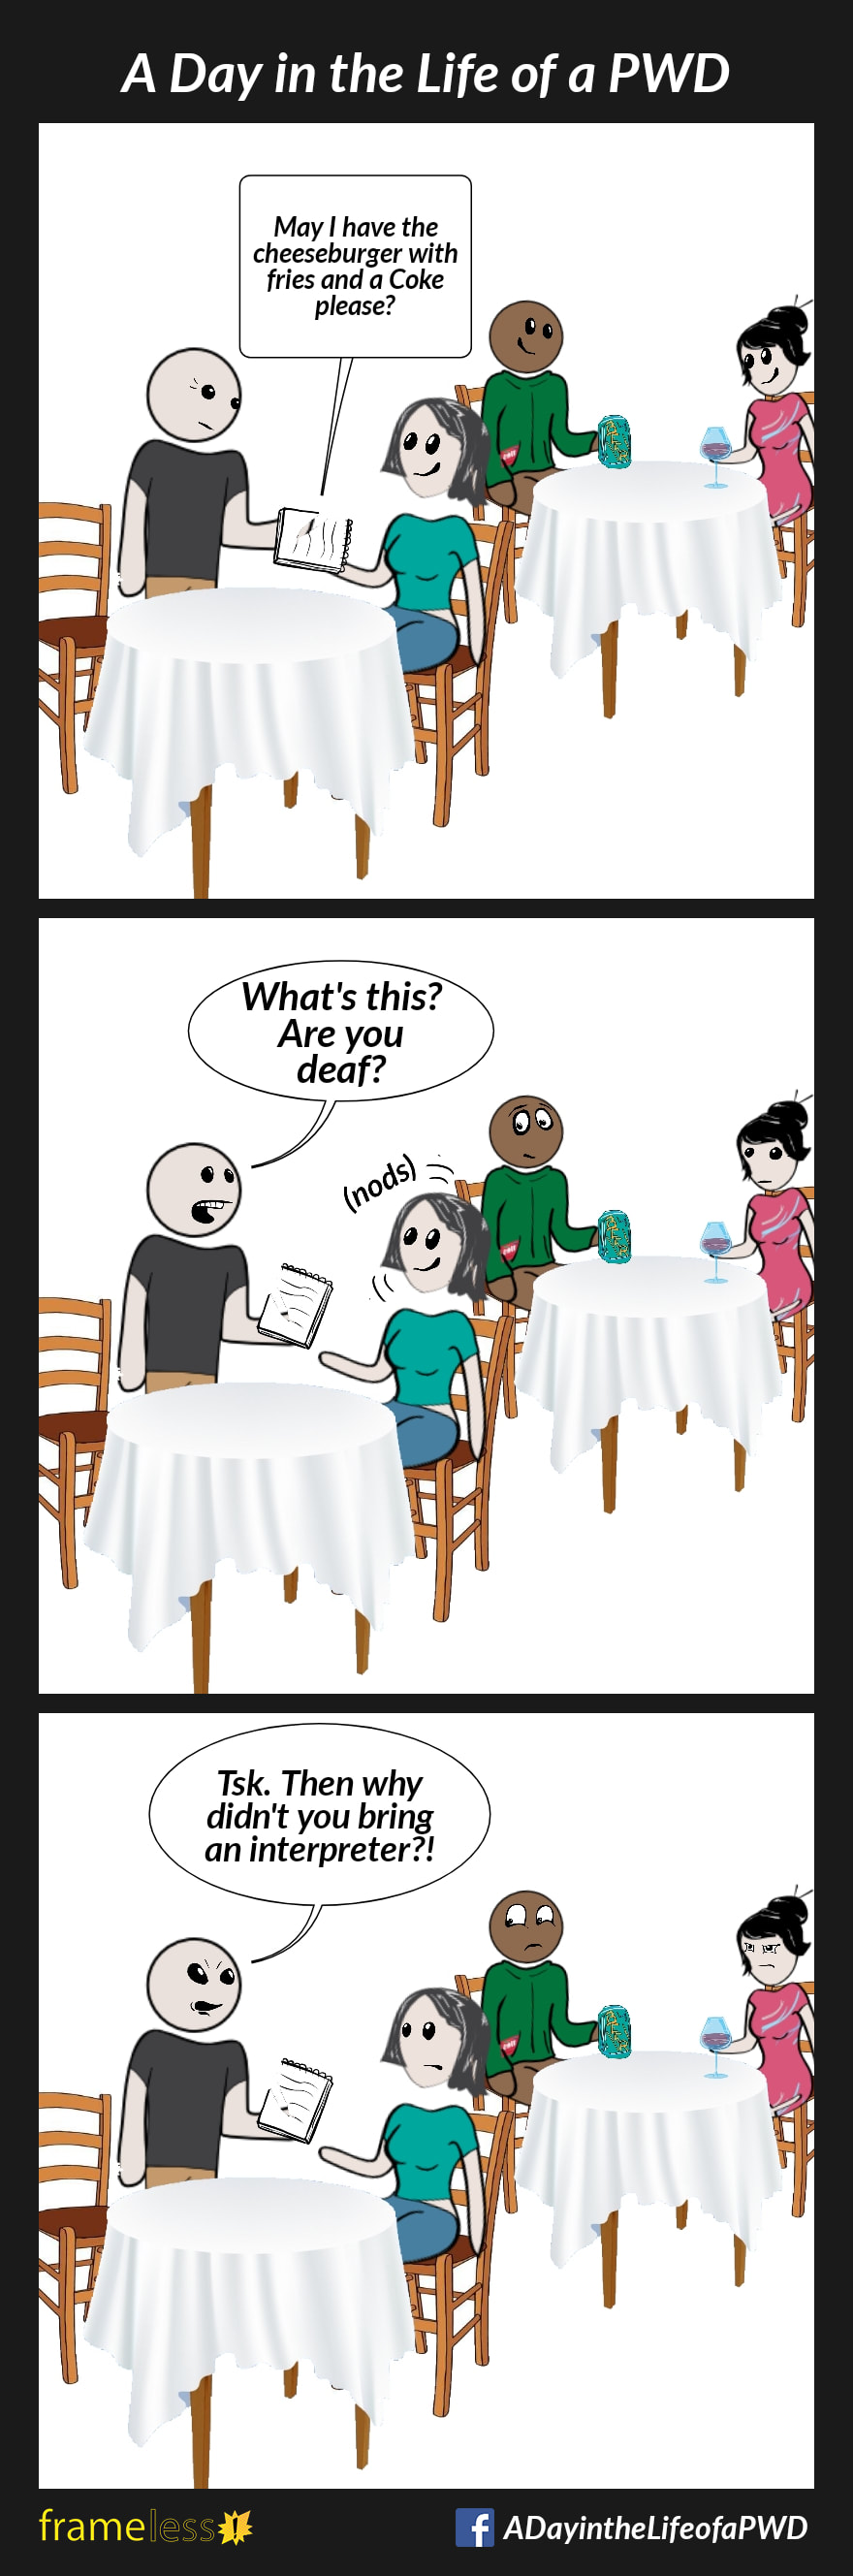 COMIC STRIP 
A Day in the Life of a PWD (Person With a Disability) 

Frame 1:
A woman sitting at a restaurant table hands the waiter a notepad.
NOTEPAD: 